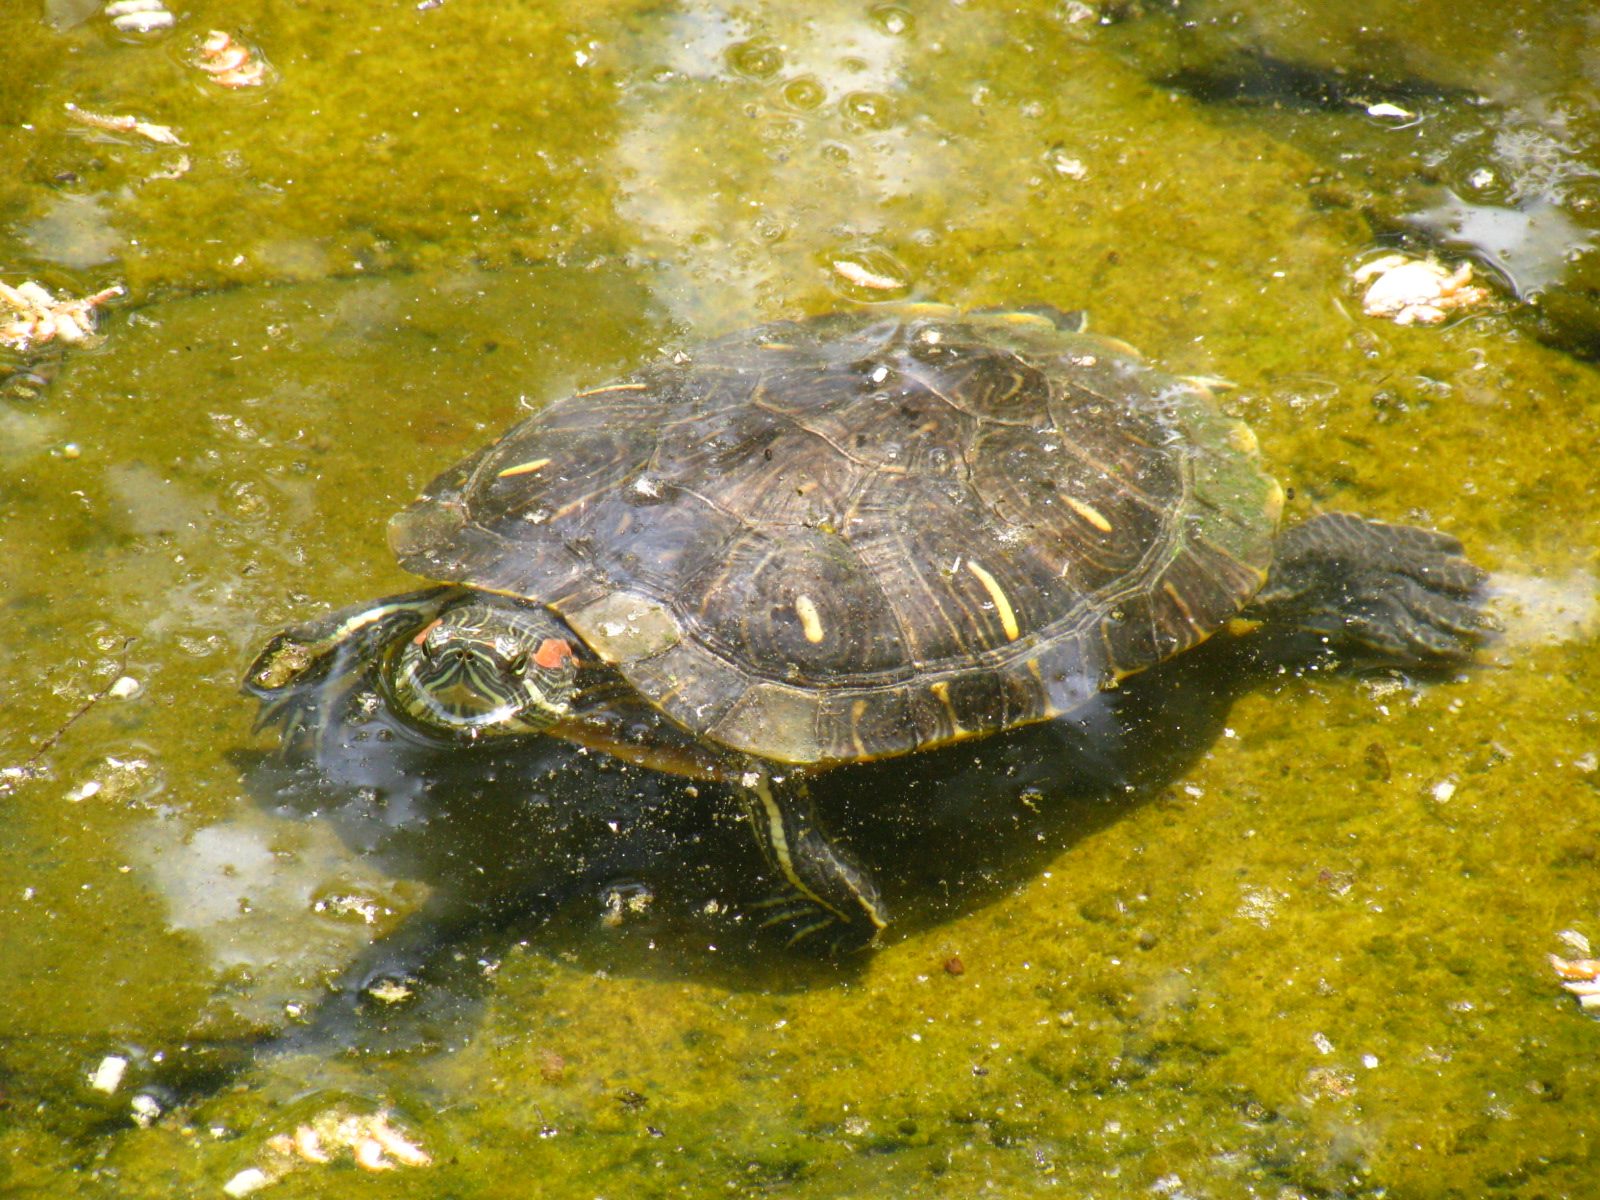 COLD-BLOODED SMUGGLING: Man sentenced for bringing turtles into Canada